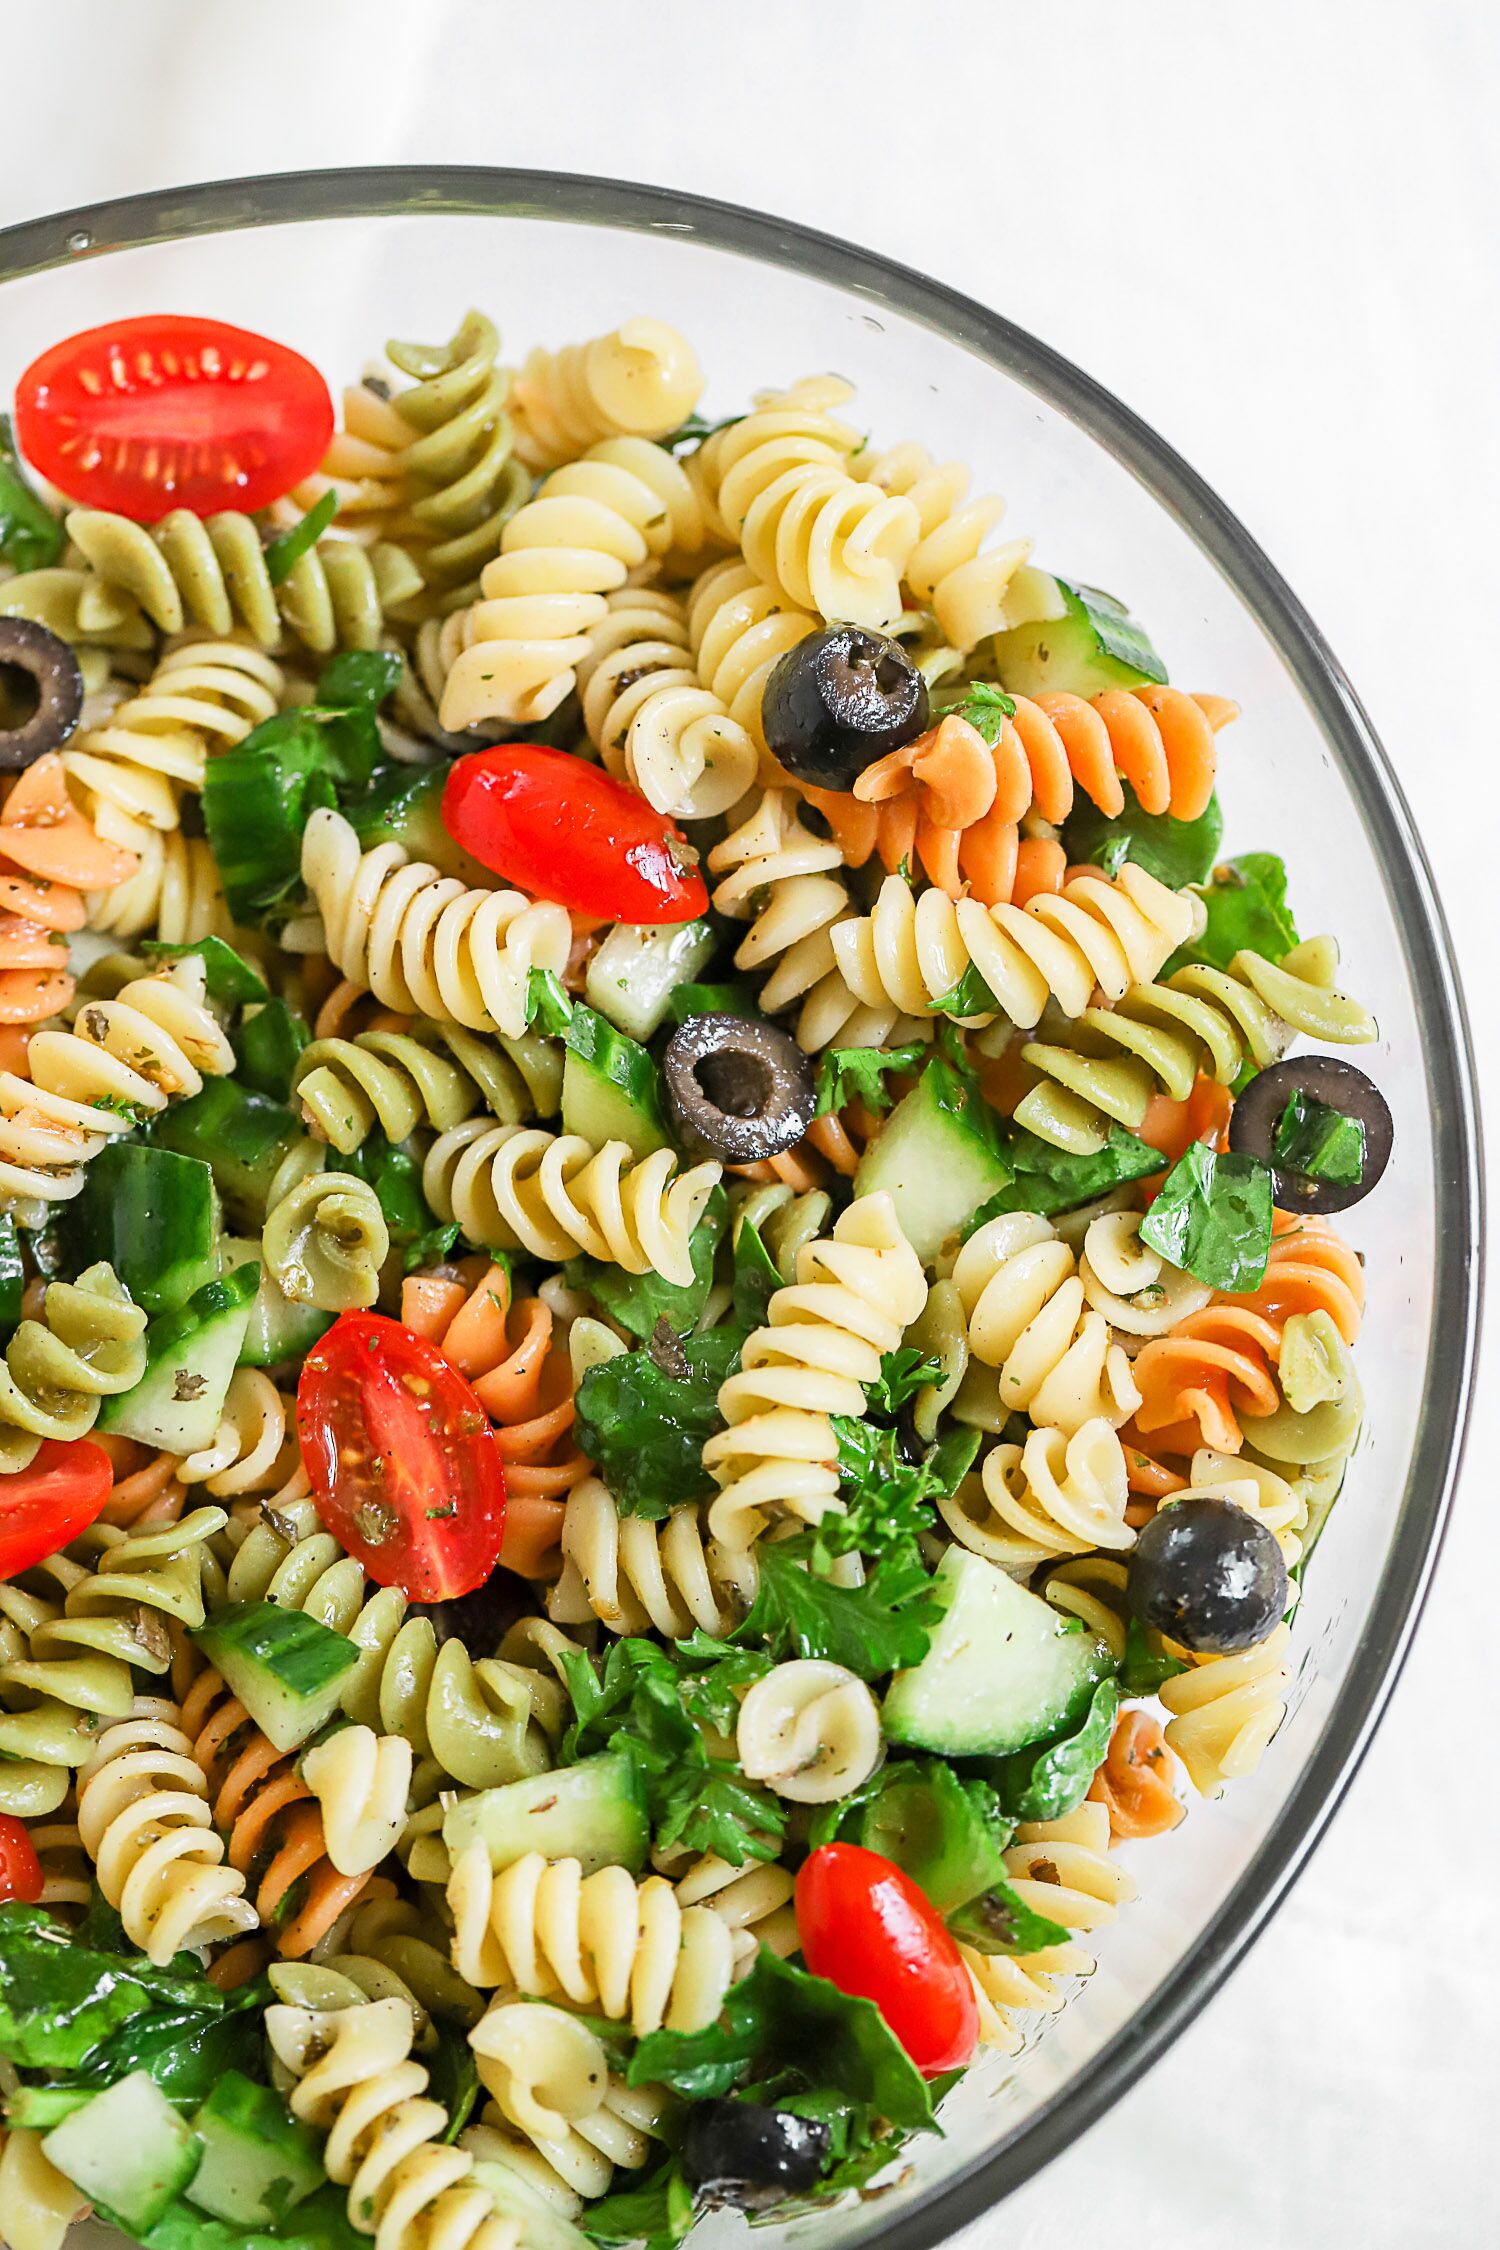 Best 15 Easy Italian Pasta Salad – Easy Recipes To Make at Home